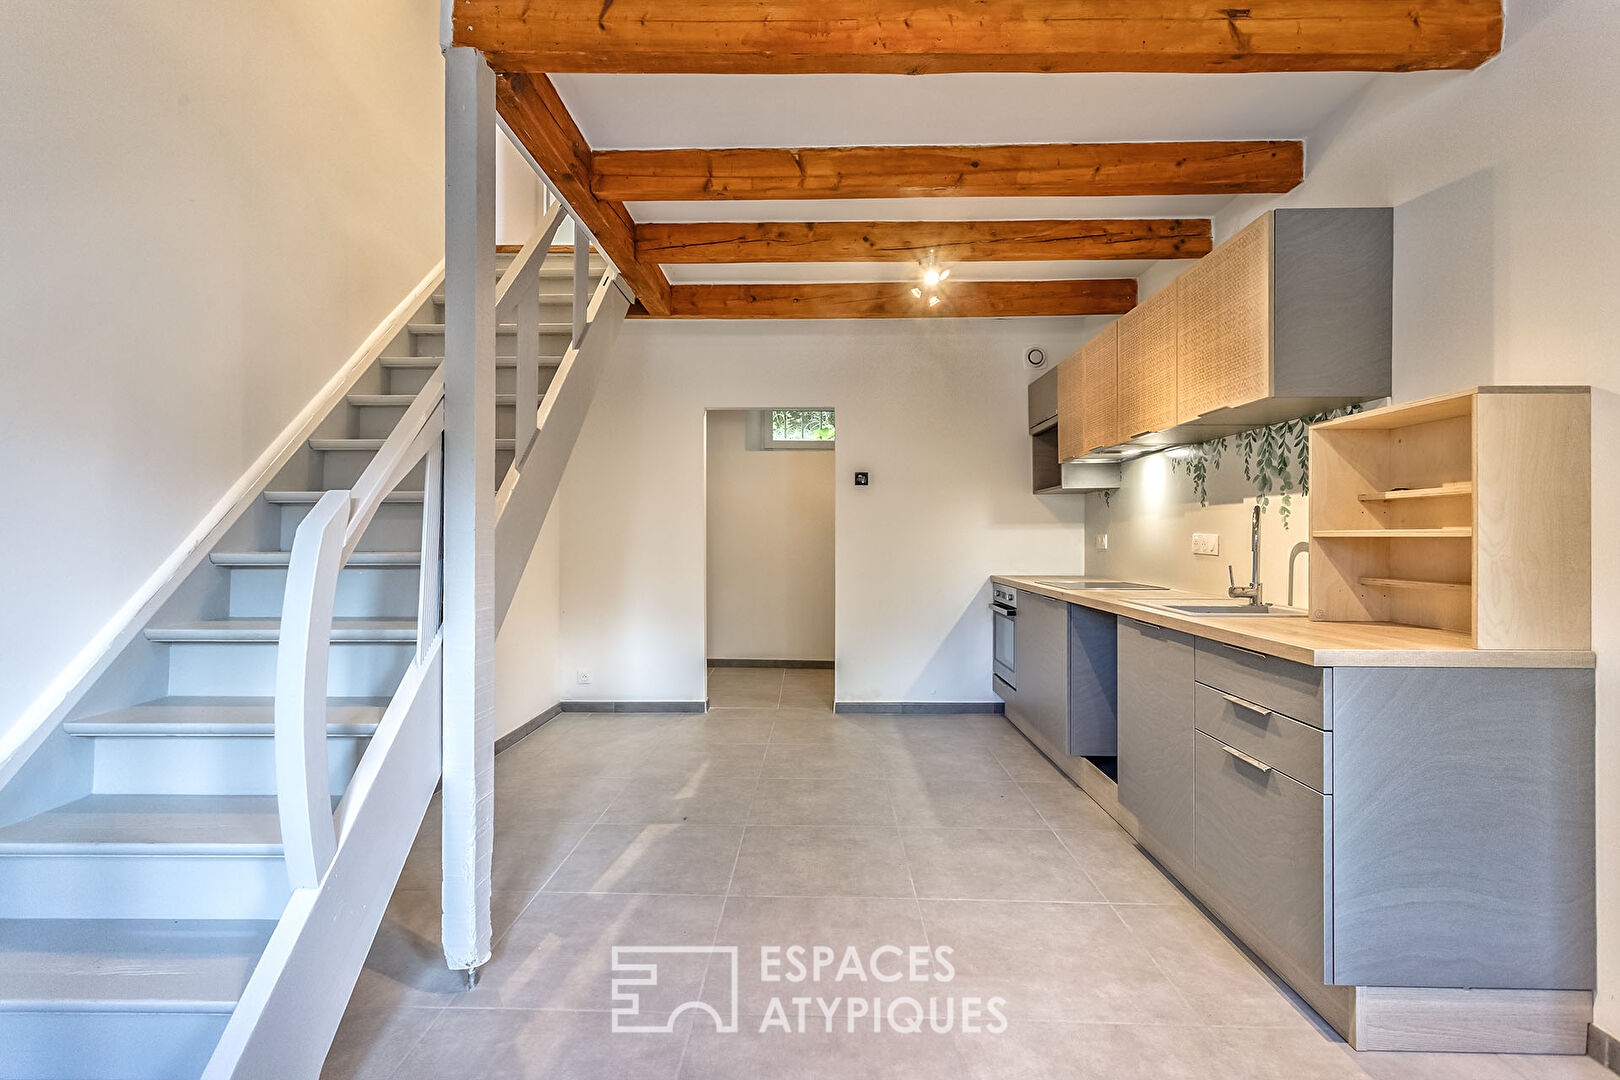 Atypical semi-detached house completely renovated